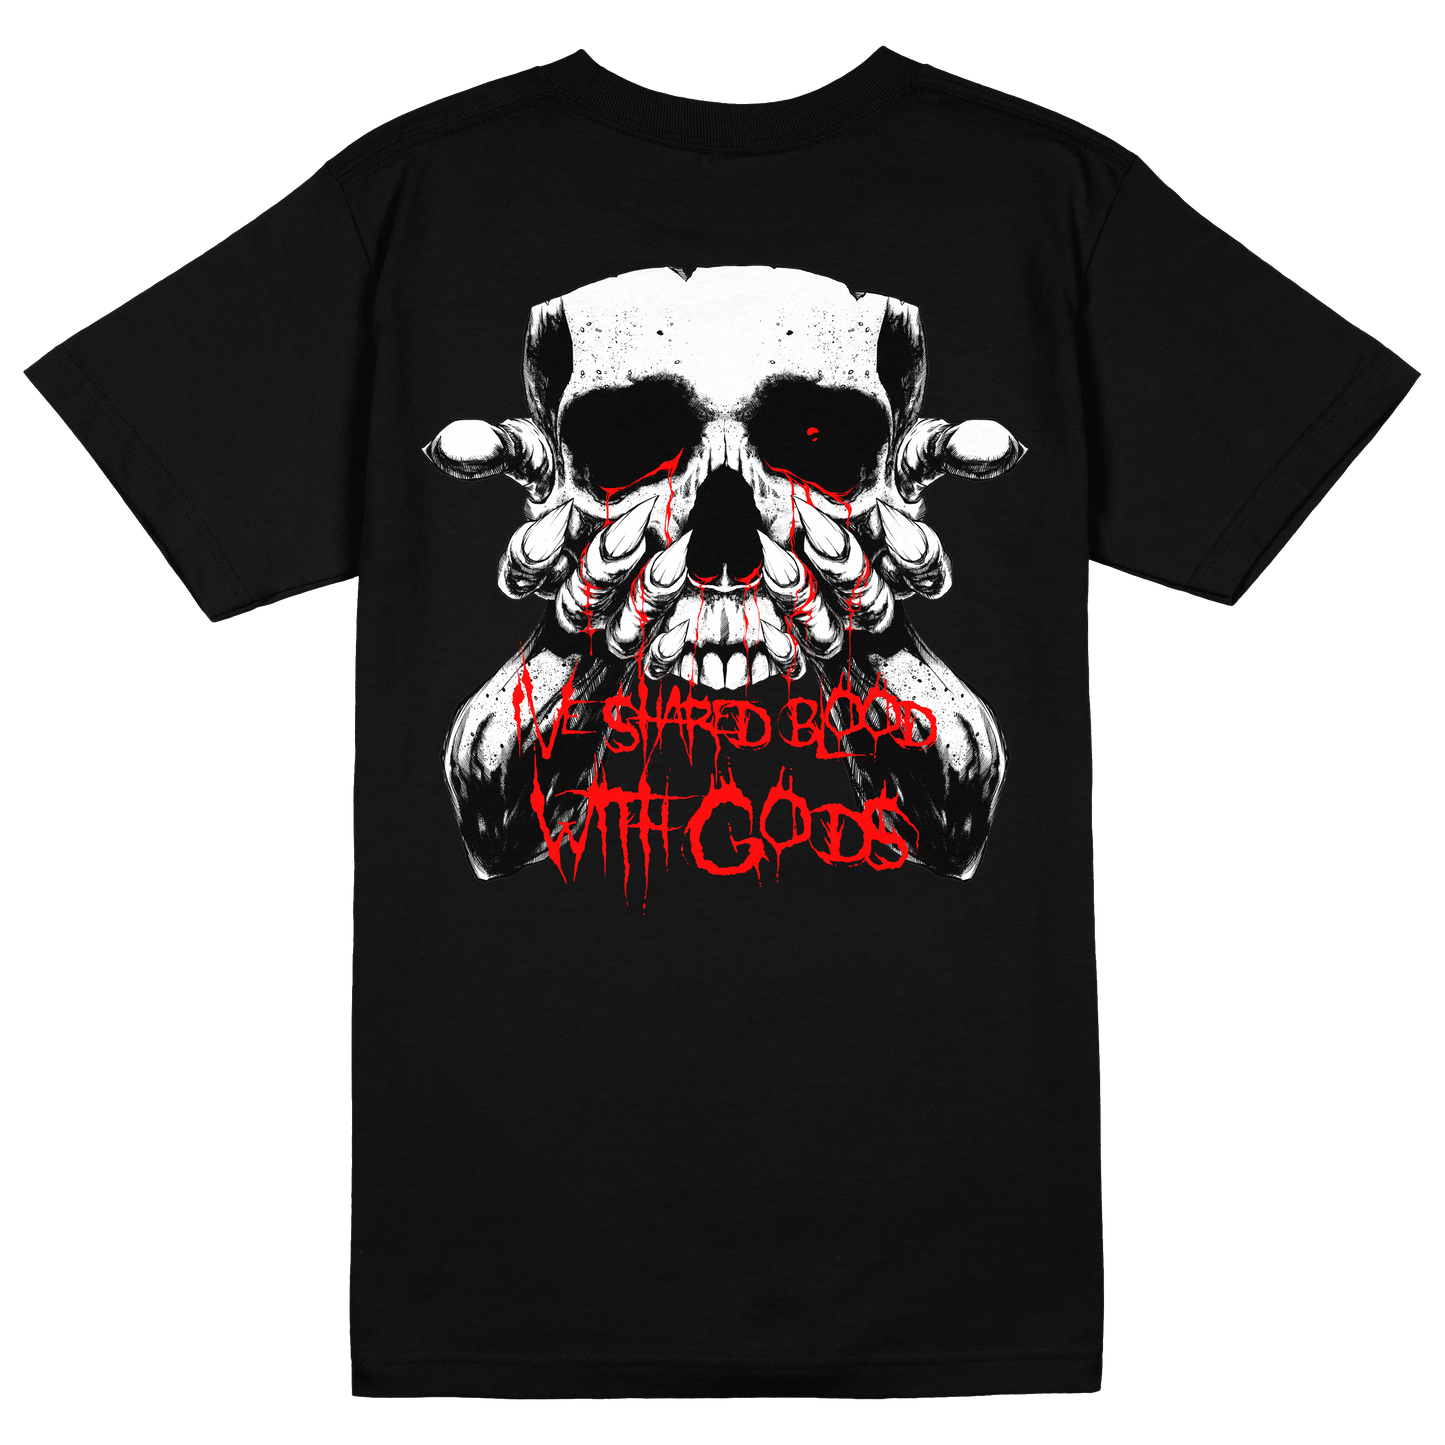 any means necessary shawn coss red fall game xbox microsoft bethesda studios chalice t shirt back